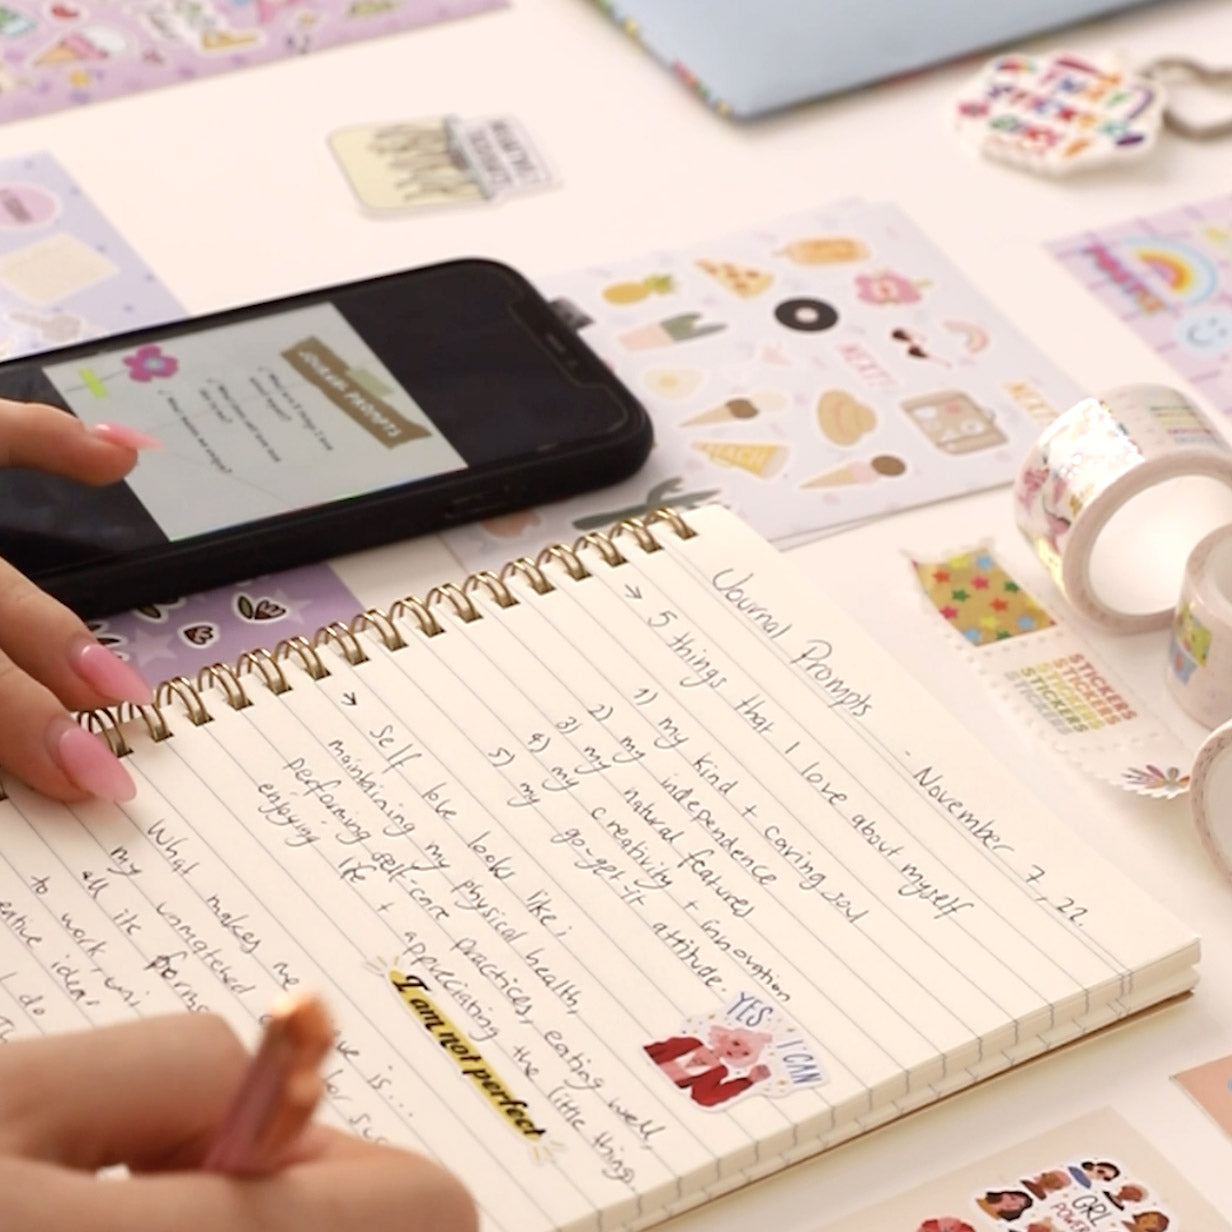 A woman uses Postix stickers in her notebooks with journal prompts